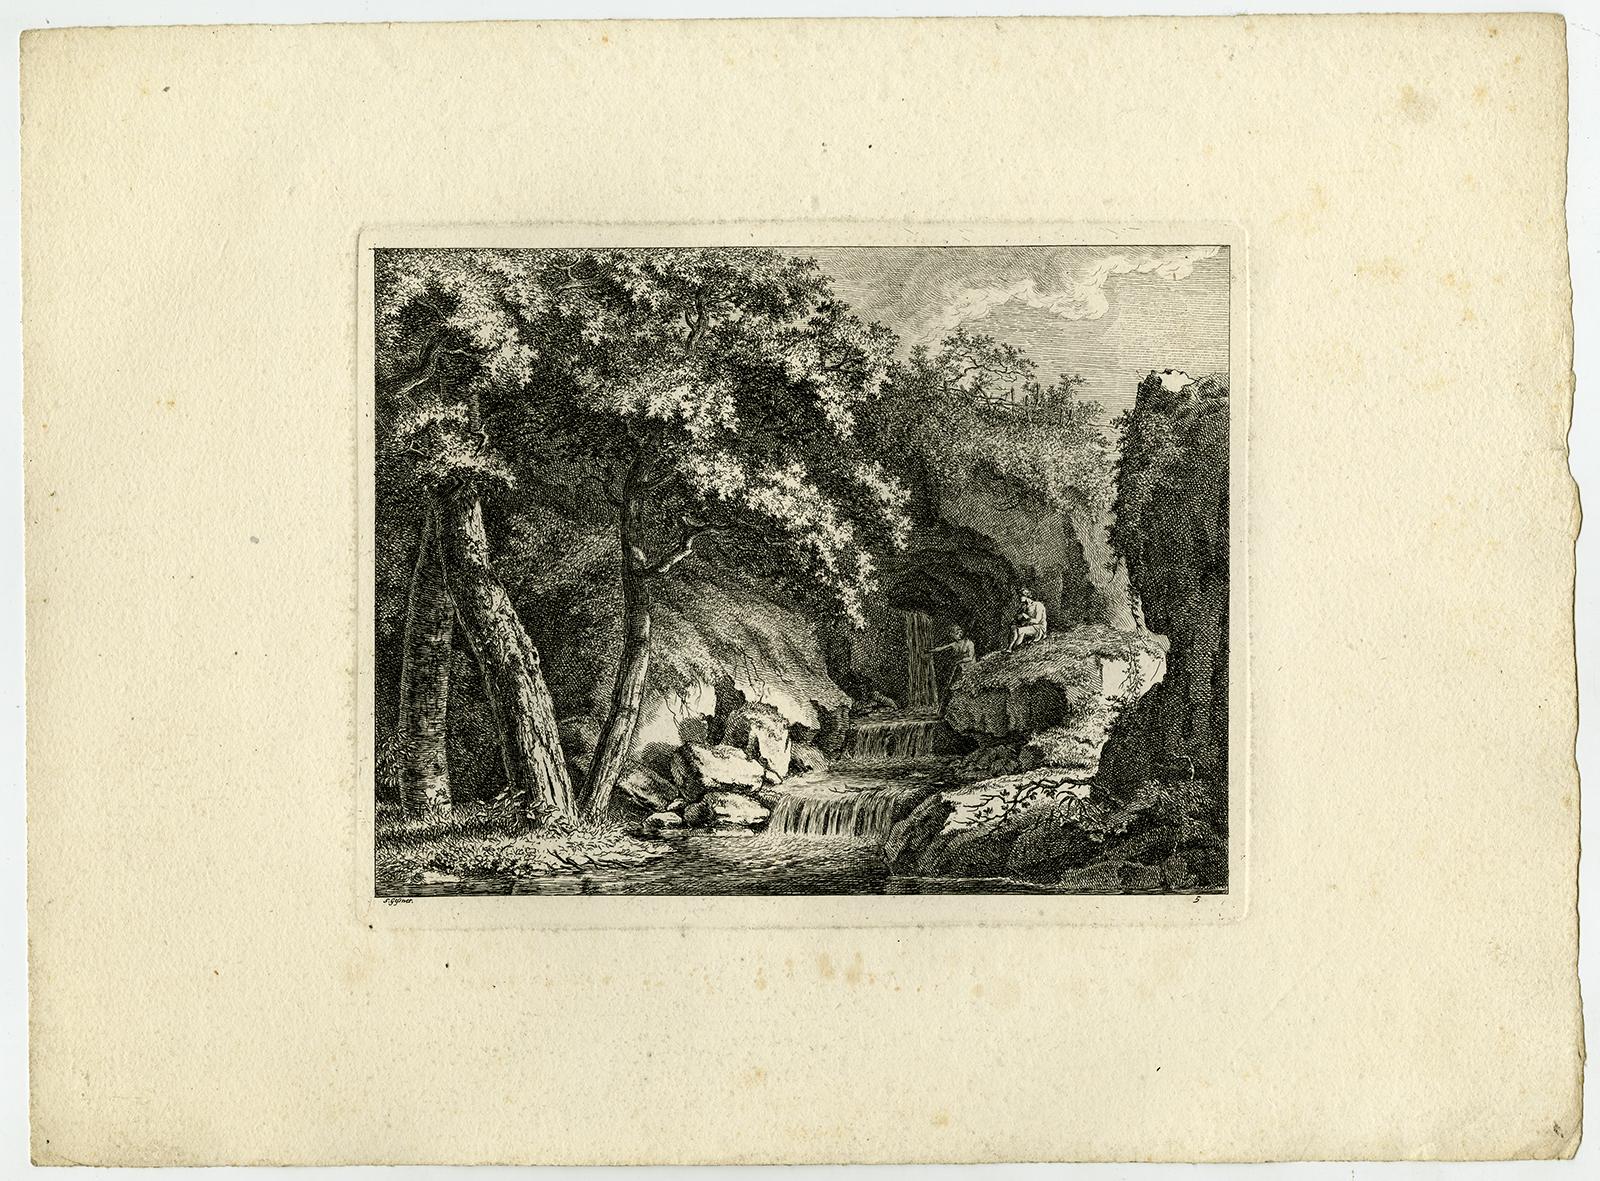 Subject:  Antique Master Print, untitled.  - Landscape with two persons sitting near a spring and waterfall.

Description:  From a set with landscapes in the 'antique' taste. . State: Second state of 2. Ref: L/E 15.

Artists and Engravers:  Made by